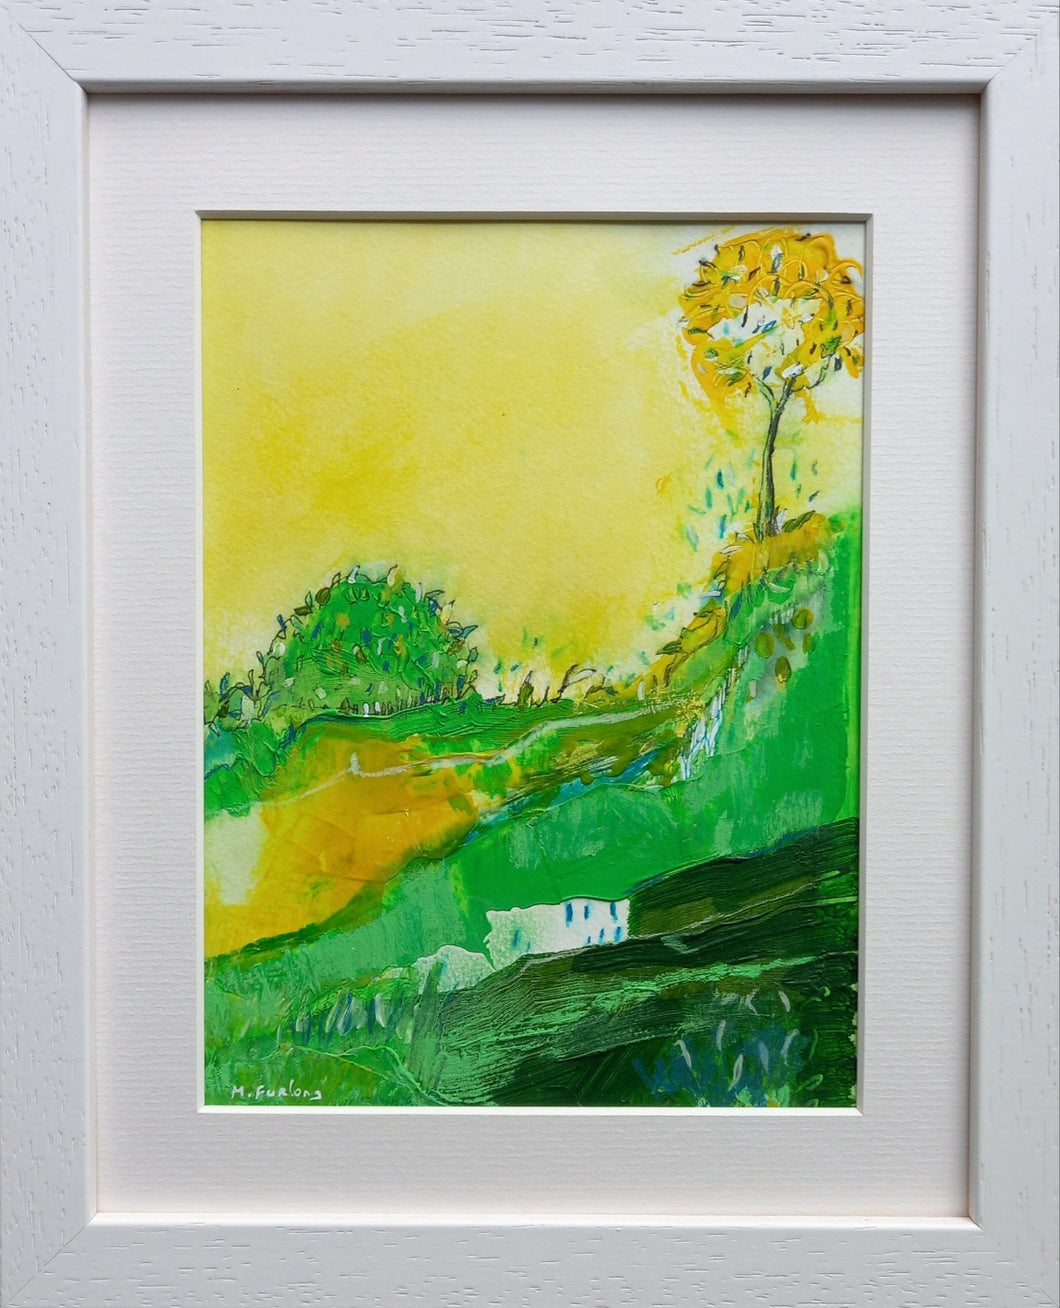 Framed landscape painting with tree in yellow and green by Irish artist Martina Furlong